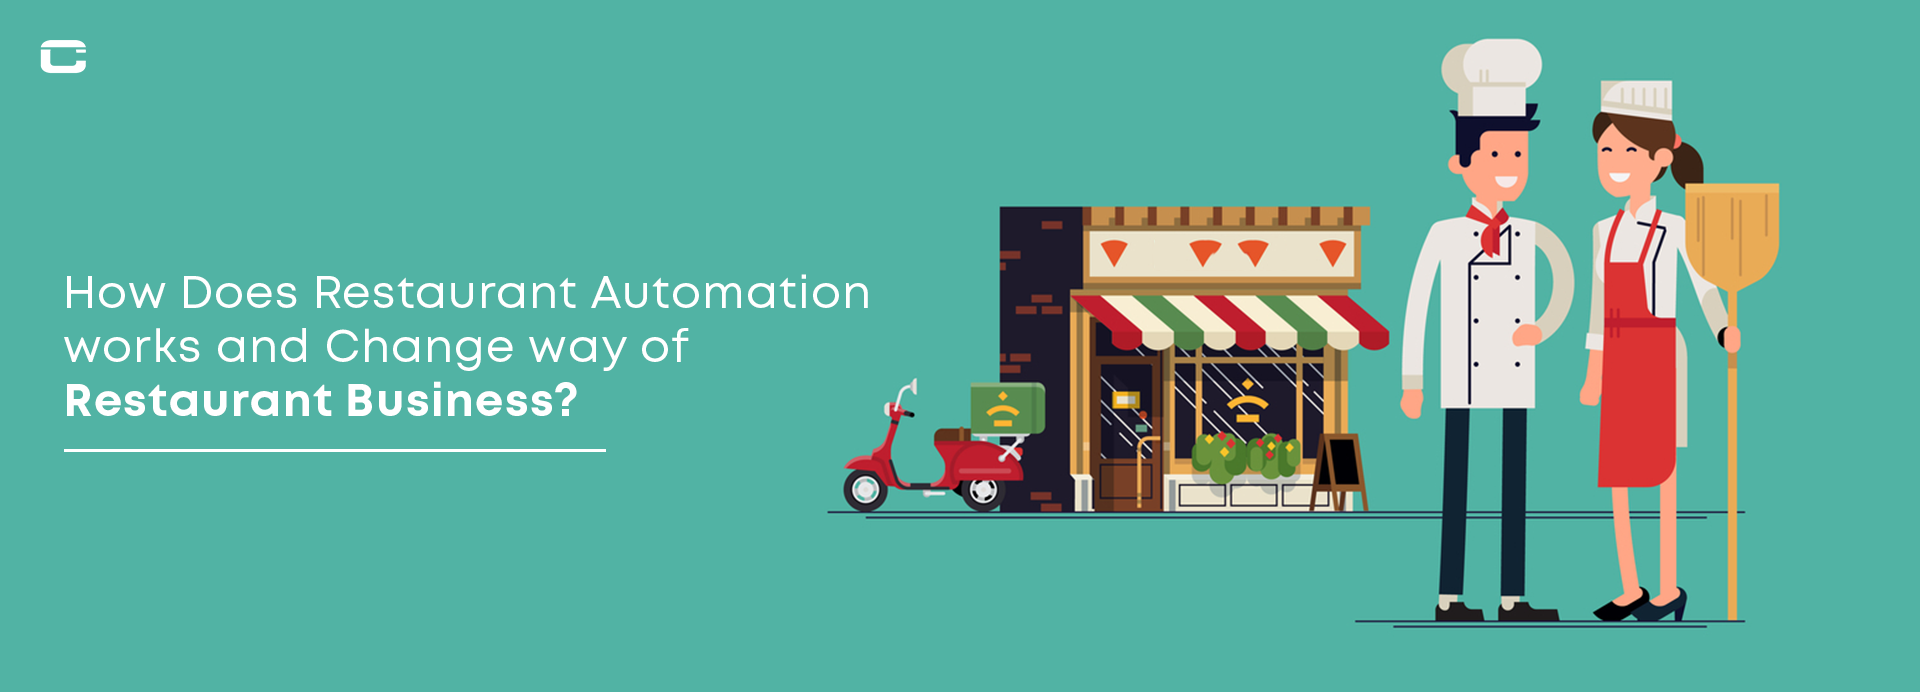 How Does Restaurant Automation work? How Automation Changes the Way of Restaurant Business?